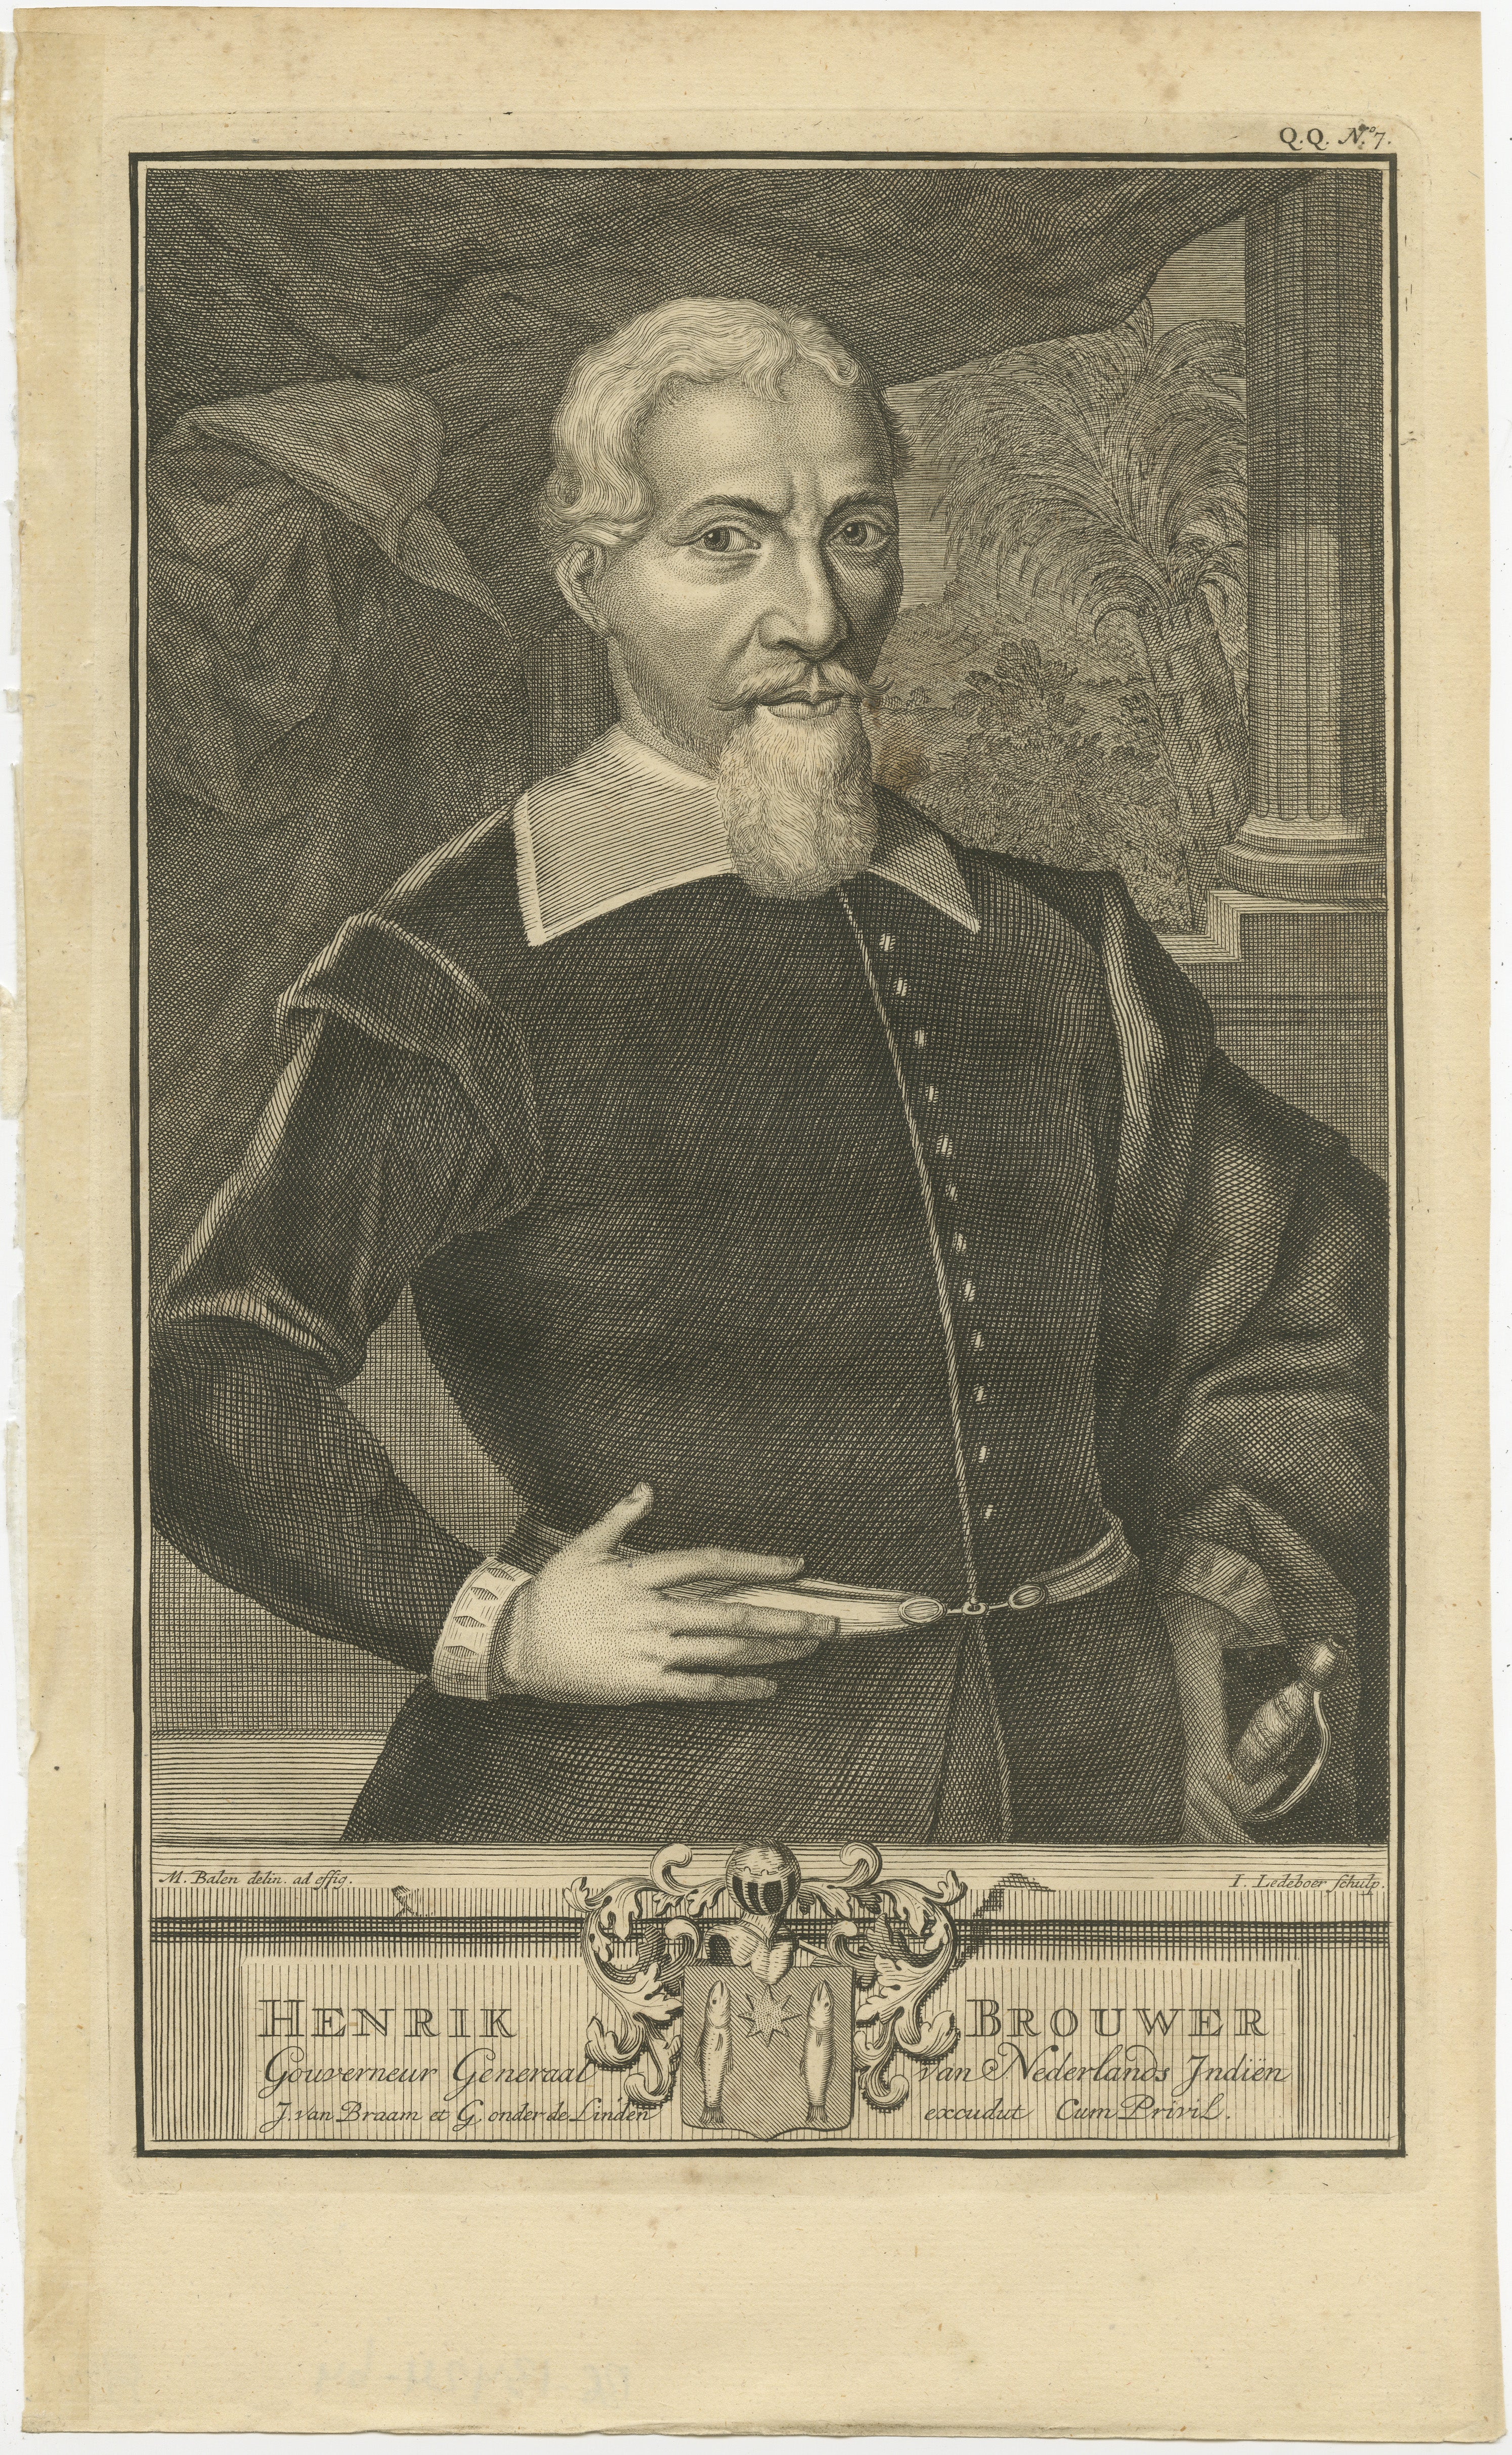 Hendrik Brouwer was a notable figure in the 17th century, particularly for his role in the Dutch East India Company (VOC) and his contributions to maritime navigation. Here's a summary of his life:

1. **Early Life and Career**: Hendrik Brouwer was